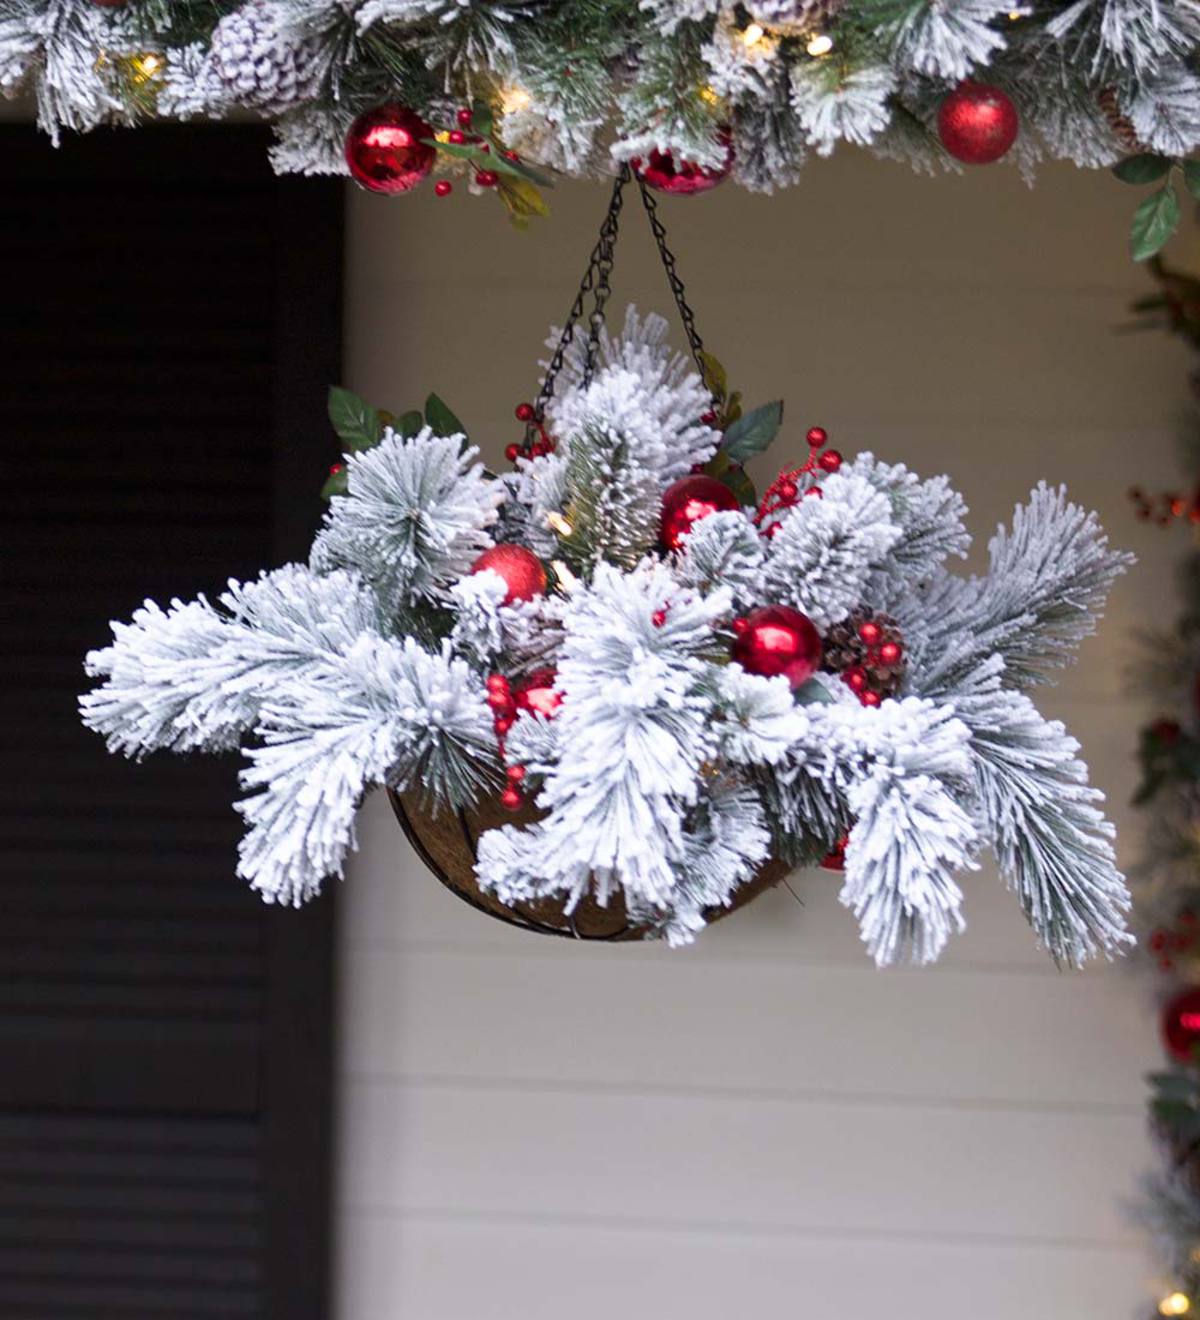 Fairfax Lighted Decorated Holiday Hanging Basket